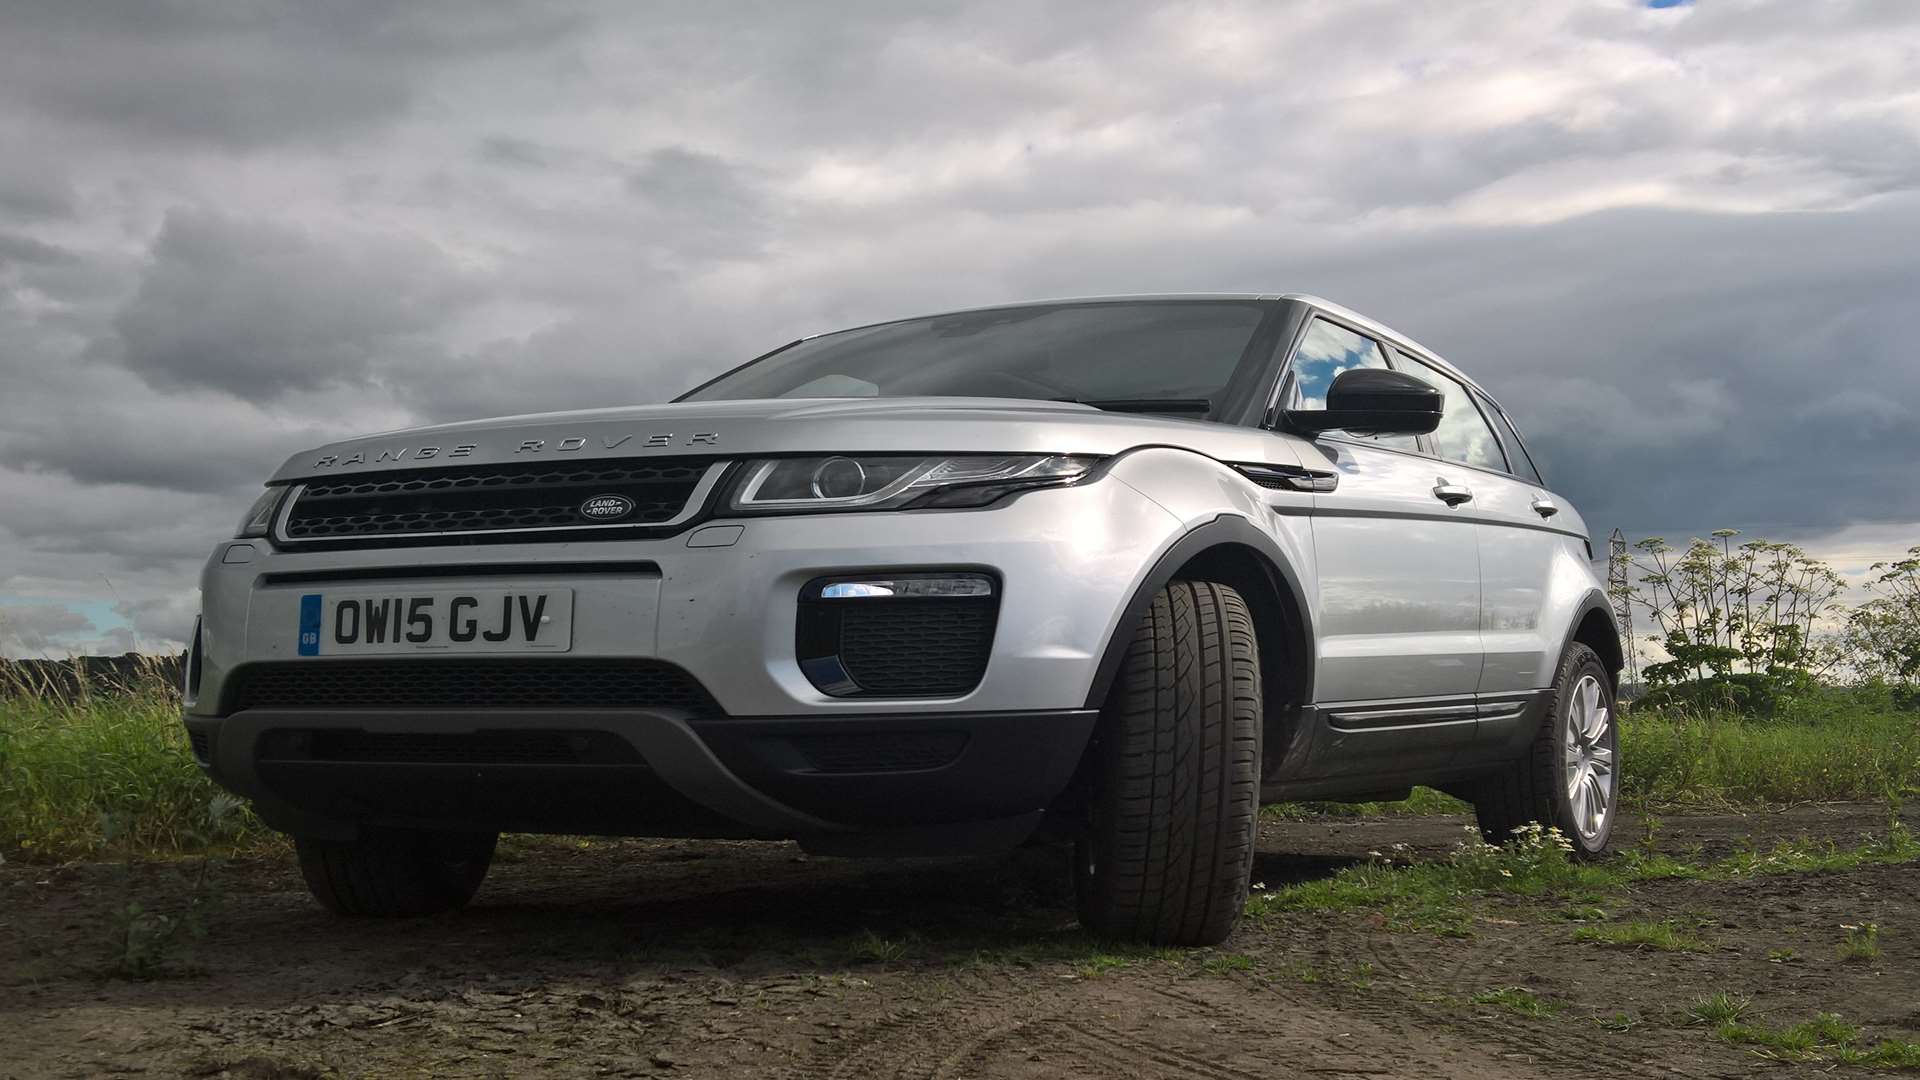 The Evoque still turns heads five years after it launched